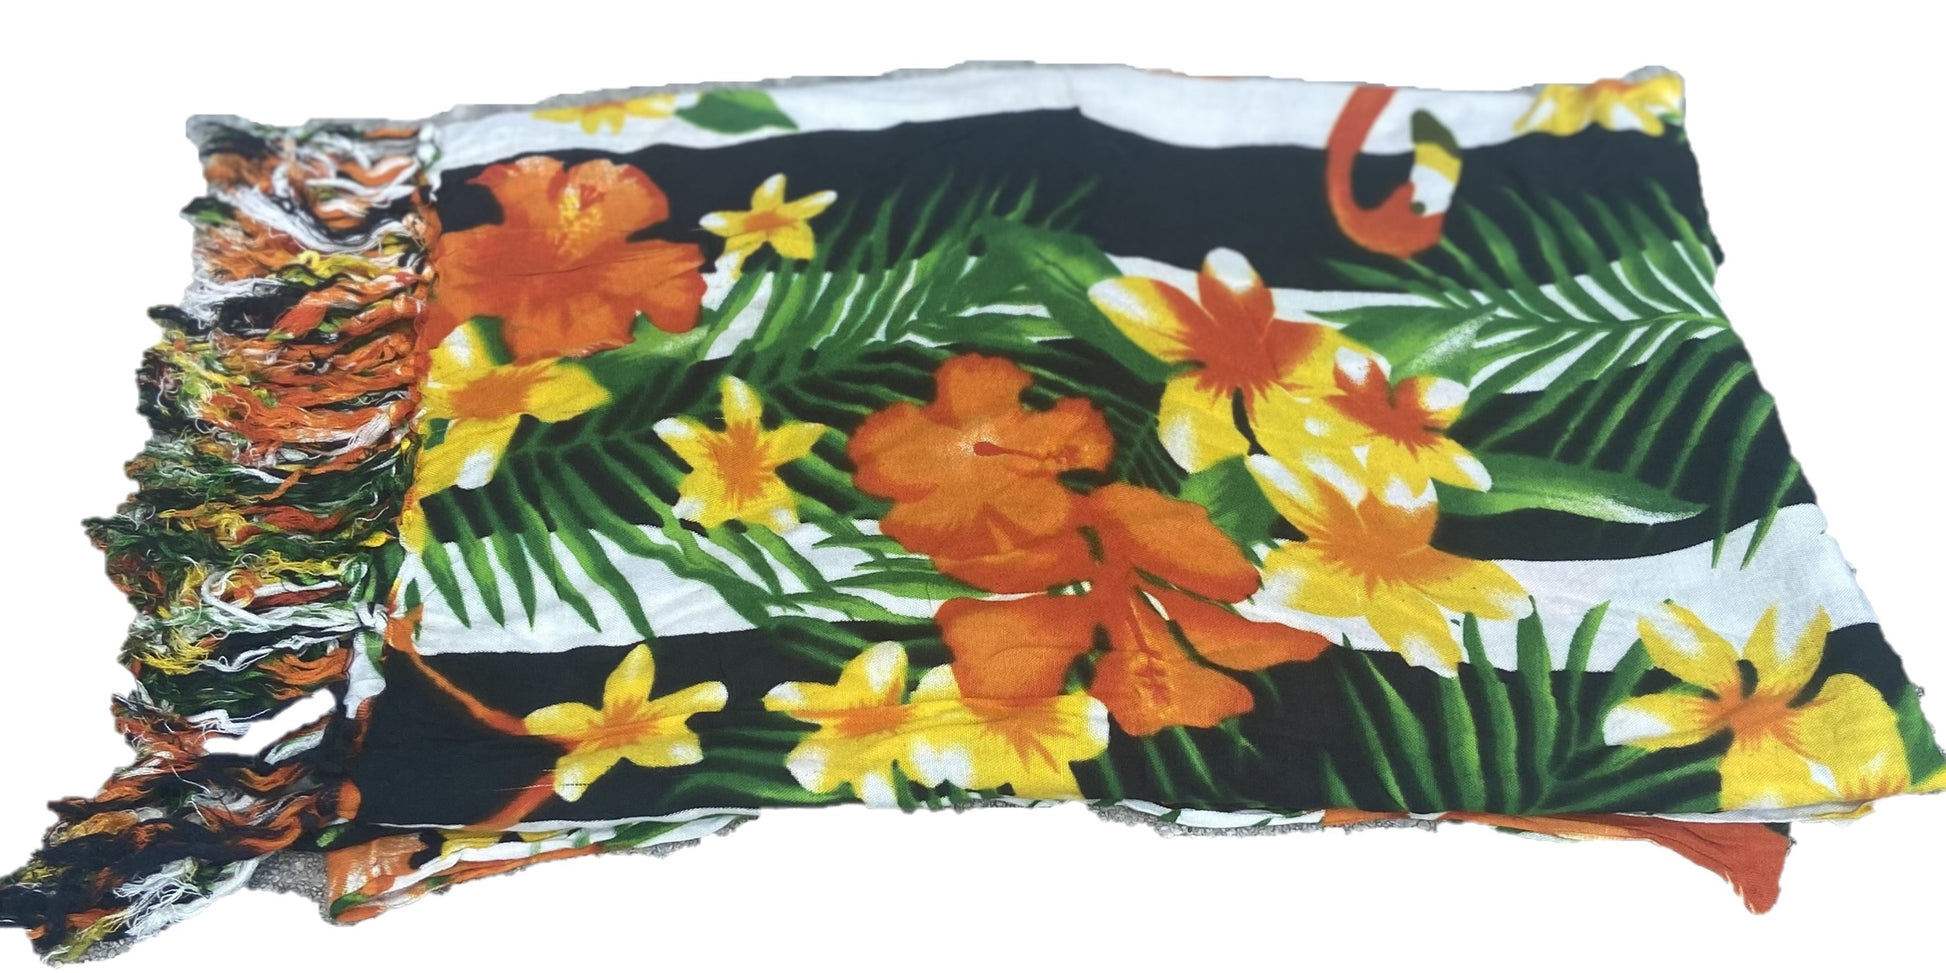 Beach Accessory & Cover Up.  Features assorted print of flowers, plants and flamingos.